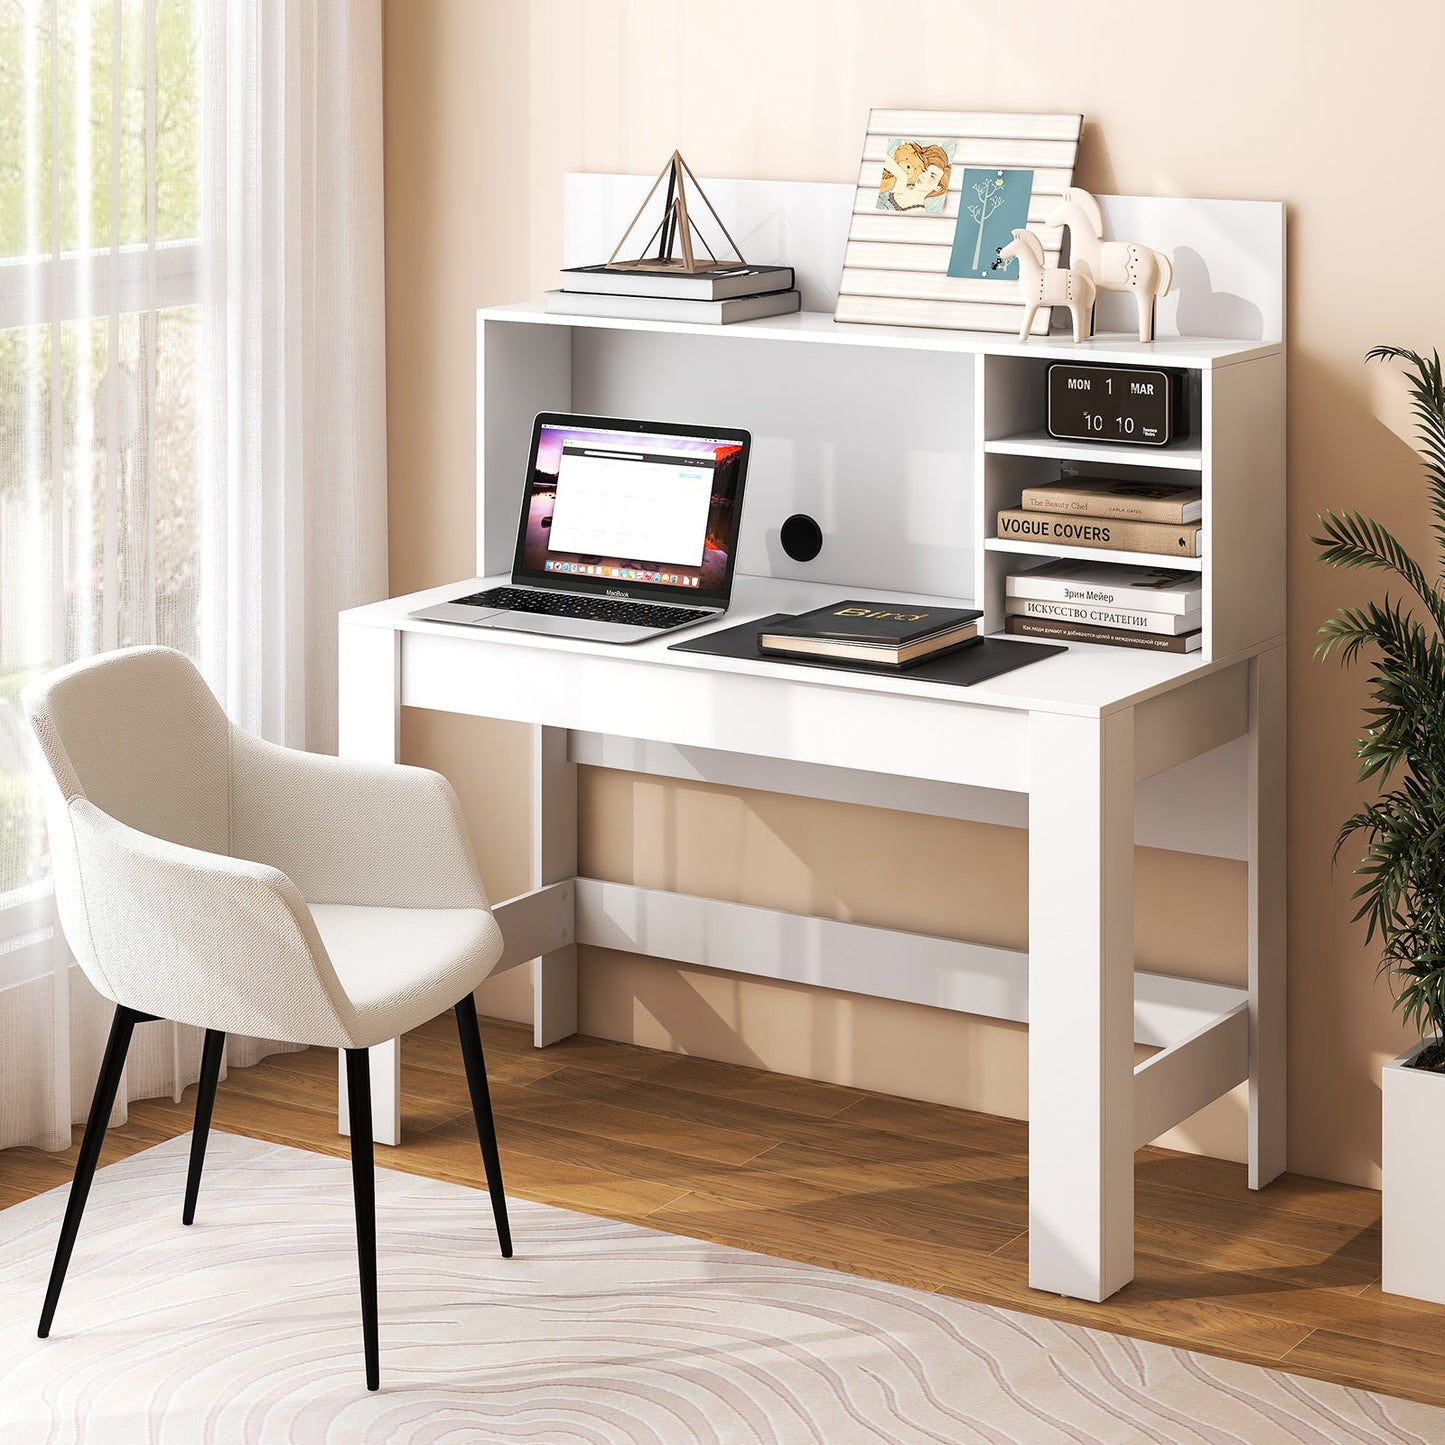 Computer Desk with Bookshelf and Anti-Tipping Kits-White